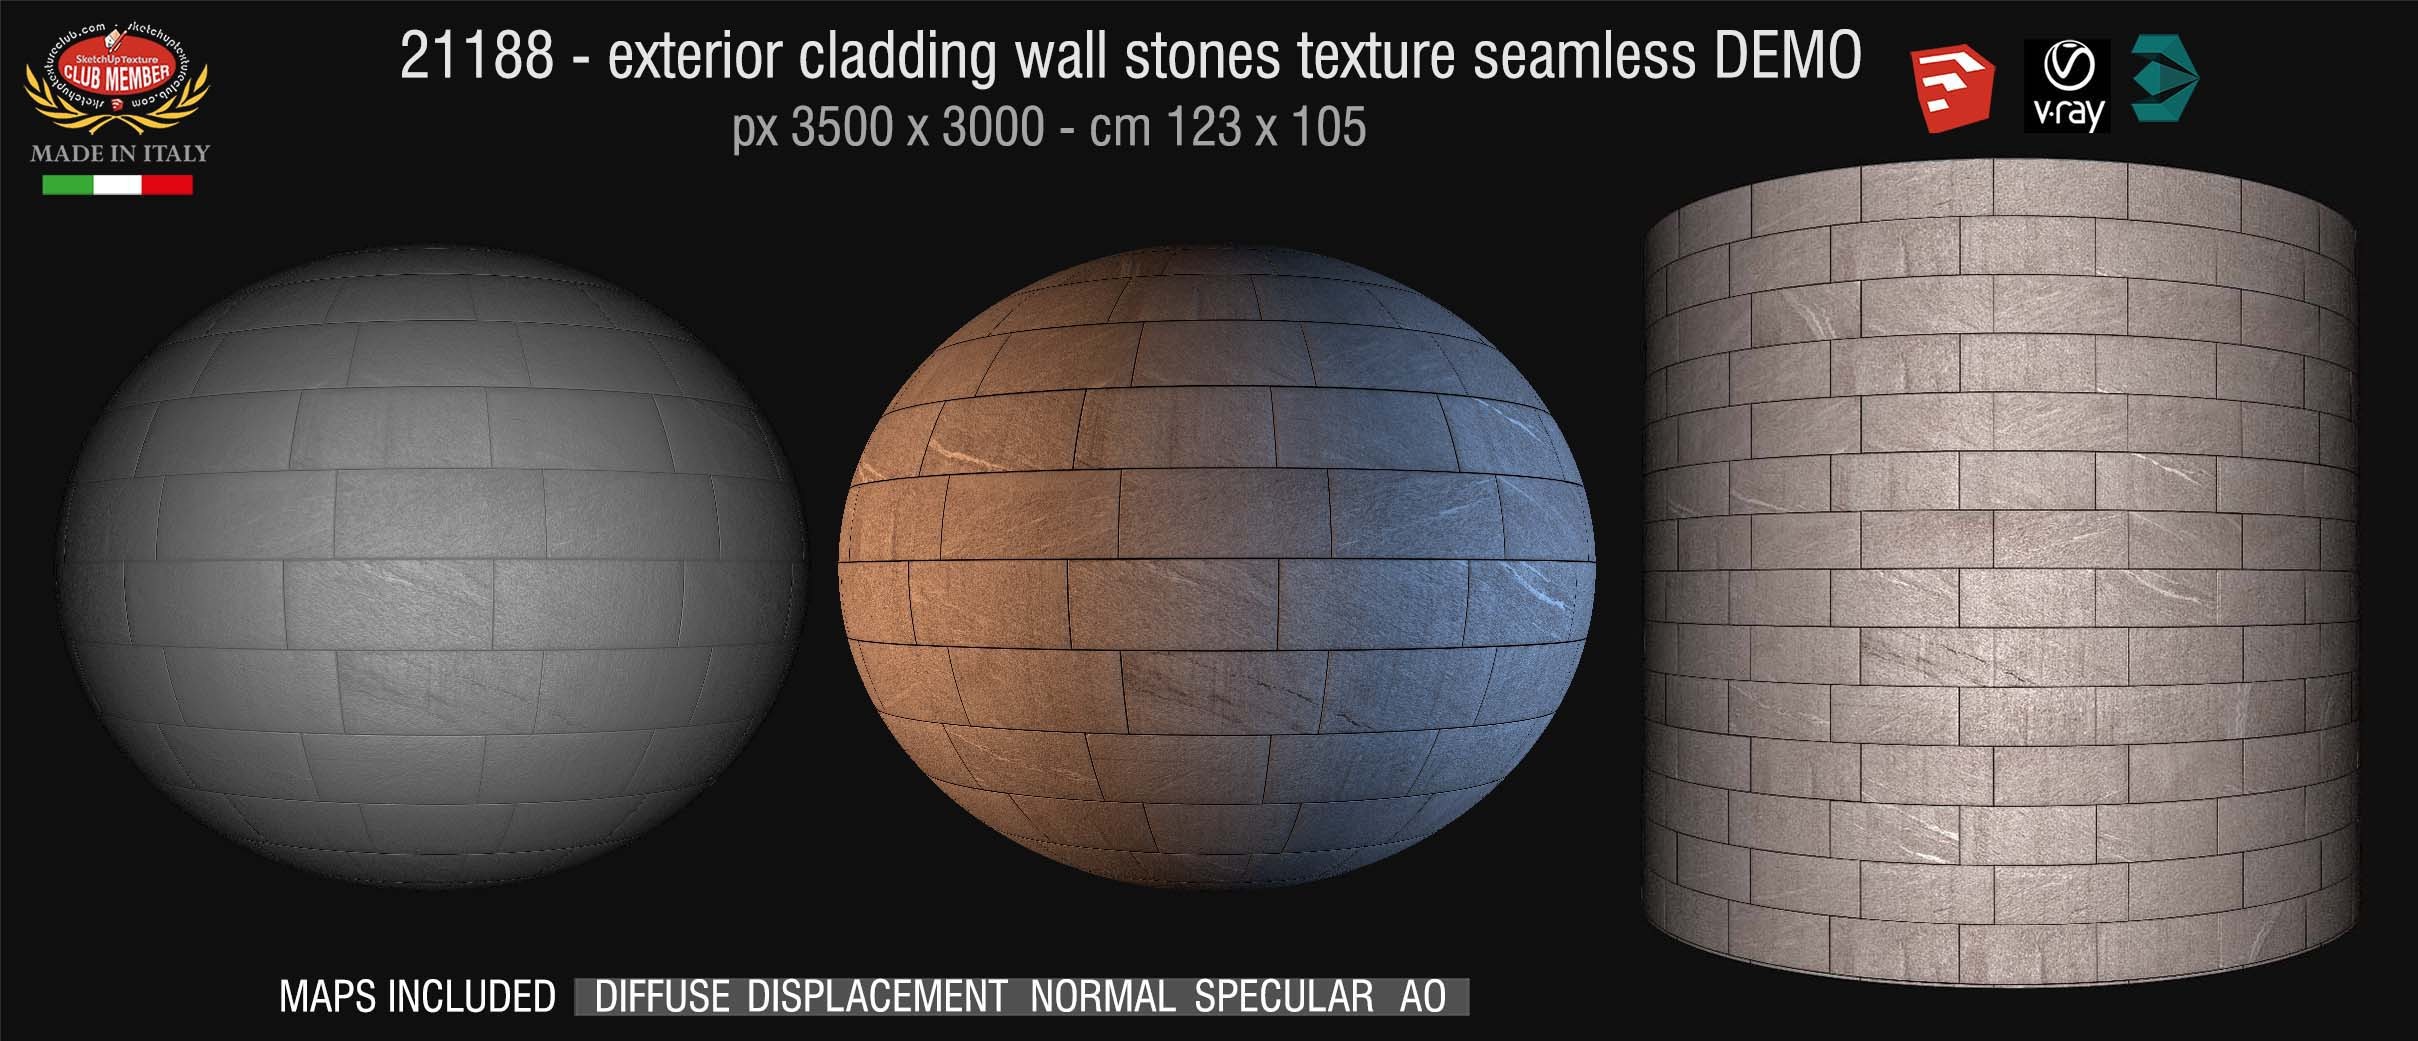 21188 Cladding wall stones texture + maps DEMO